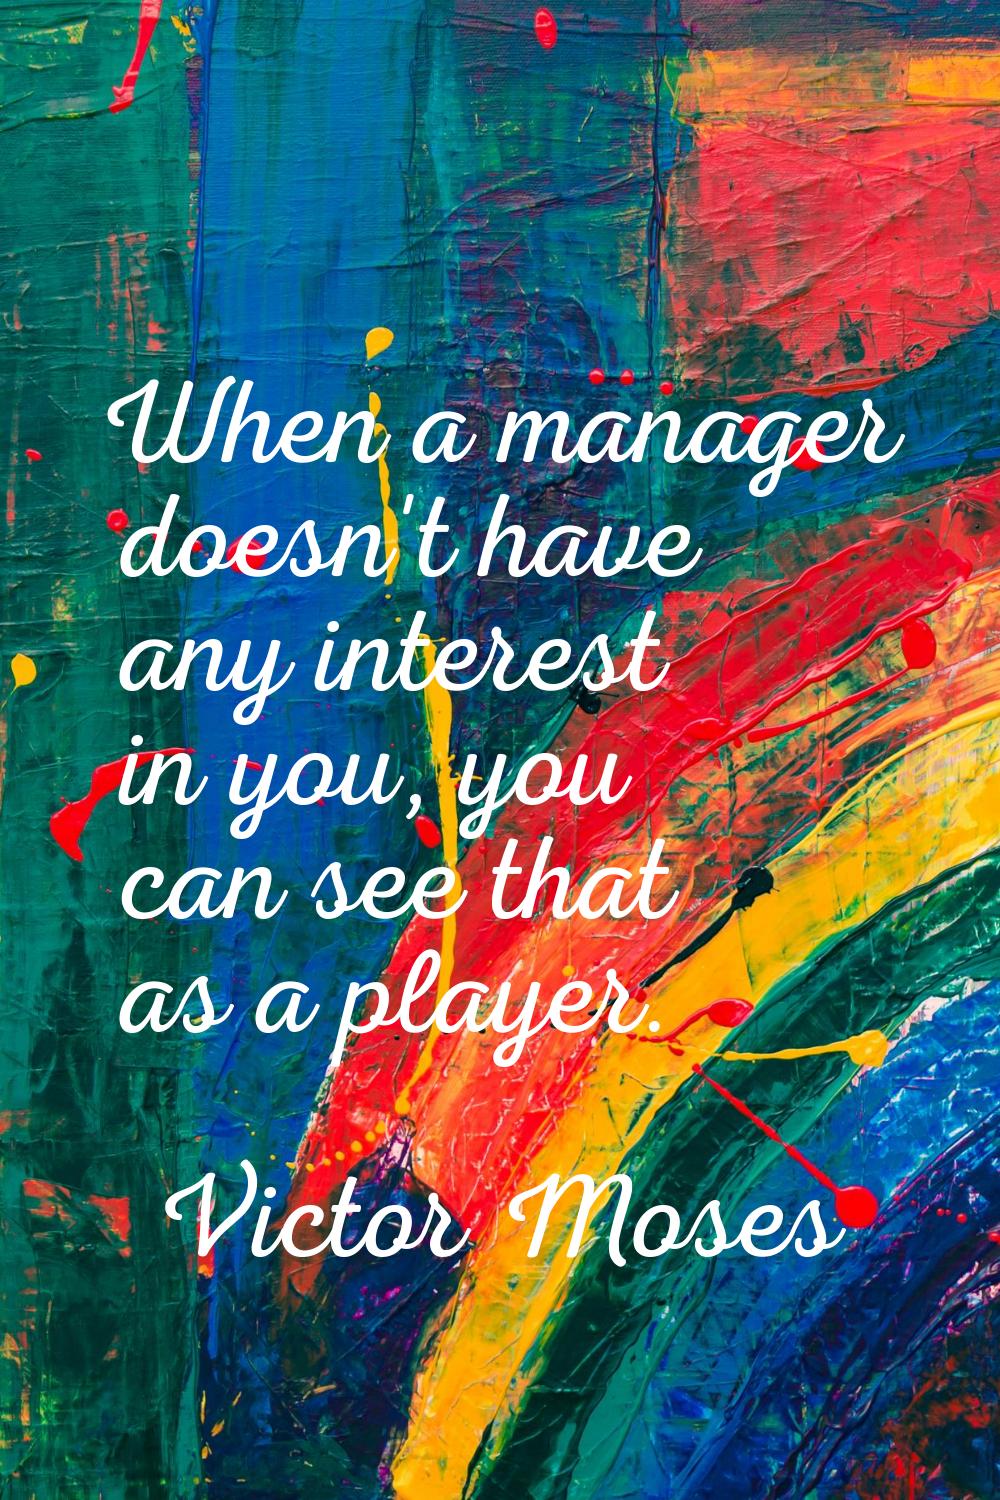 When a manager doesn't have any interest in you, you can see that as a player.